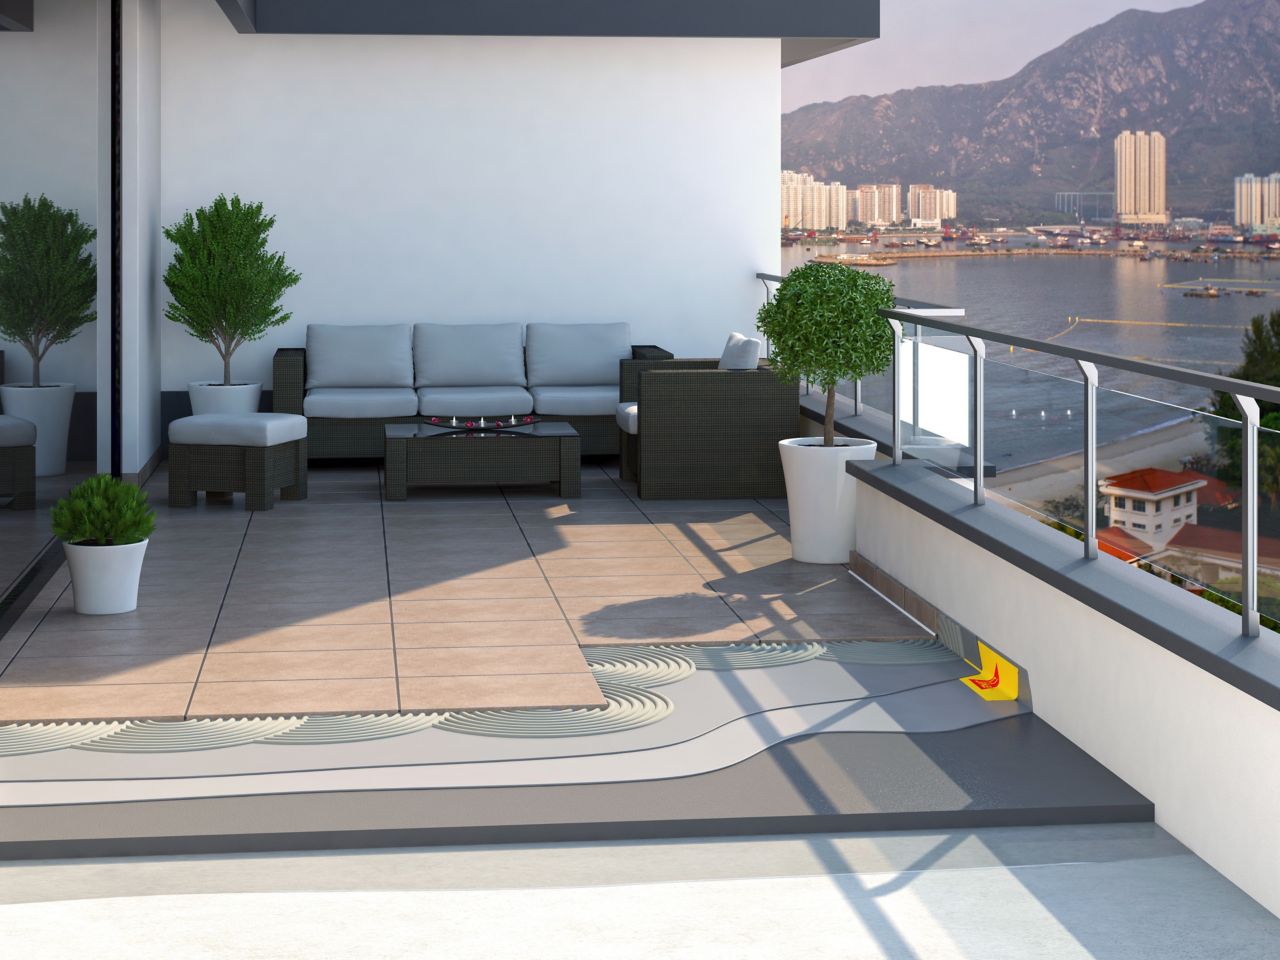 Illustration of tile setting adhesives and waterproofing tape on balcony with furniture overlooking harbor bay city view